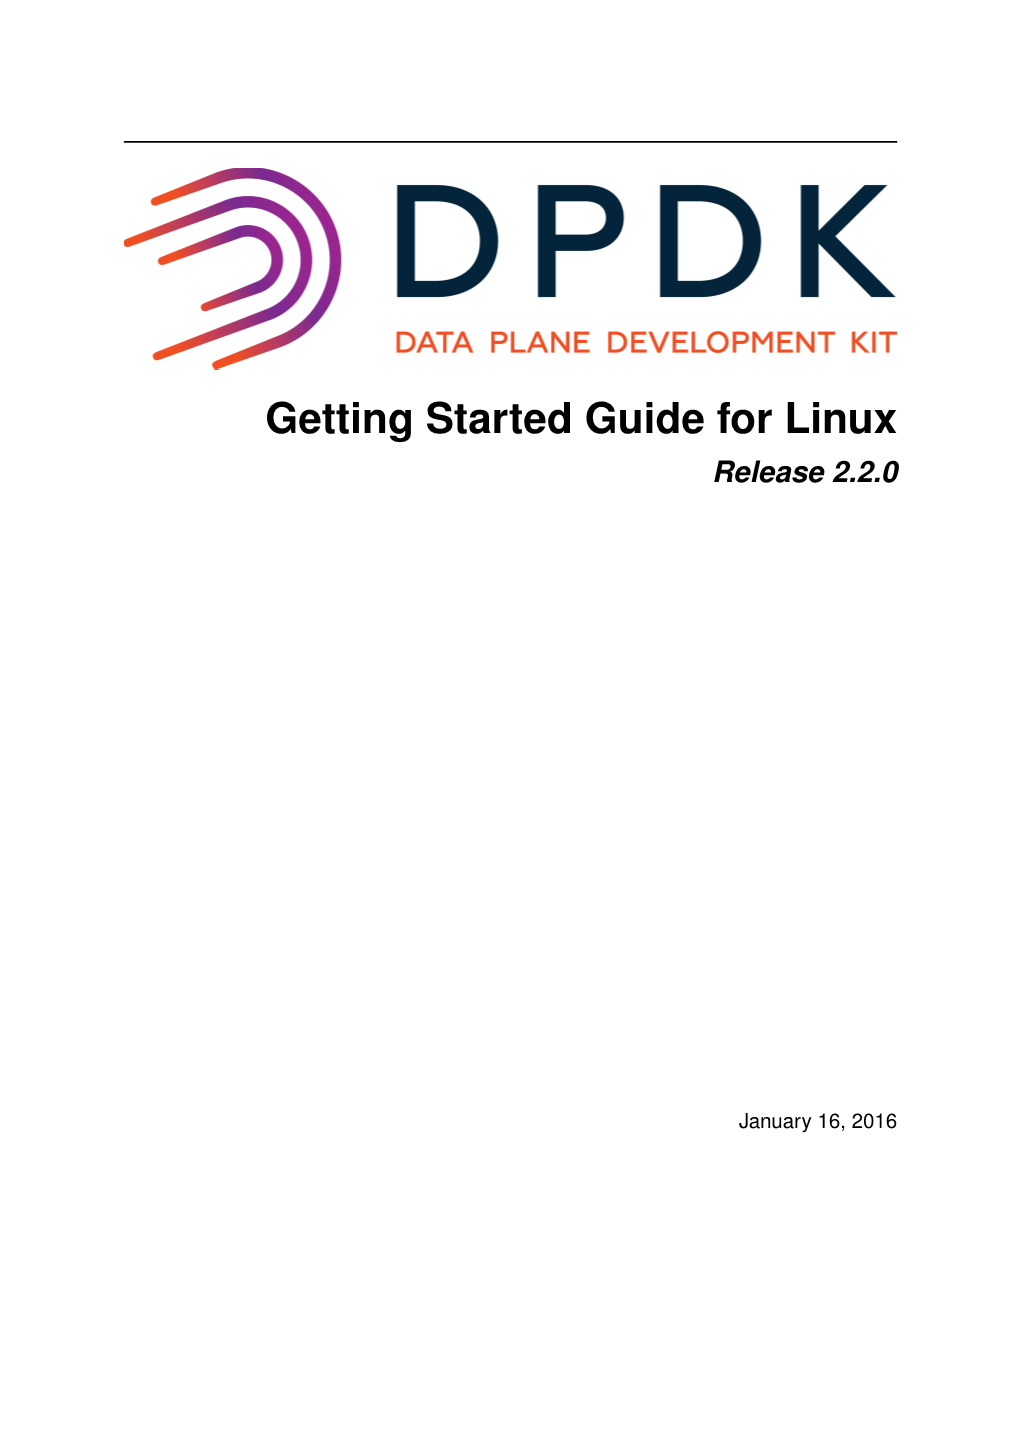 Getting Started Guide for Linux Release 2.2.0